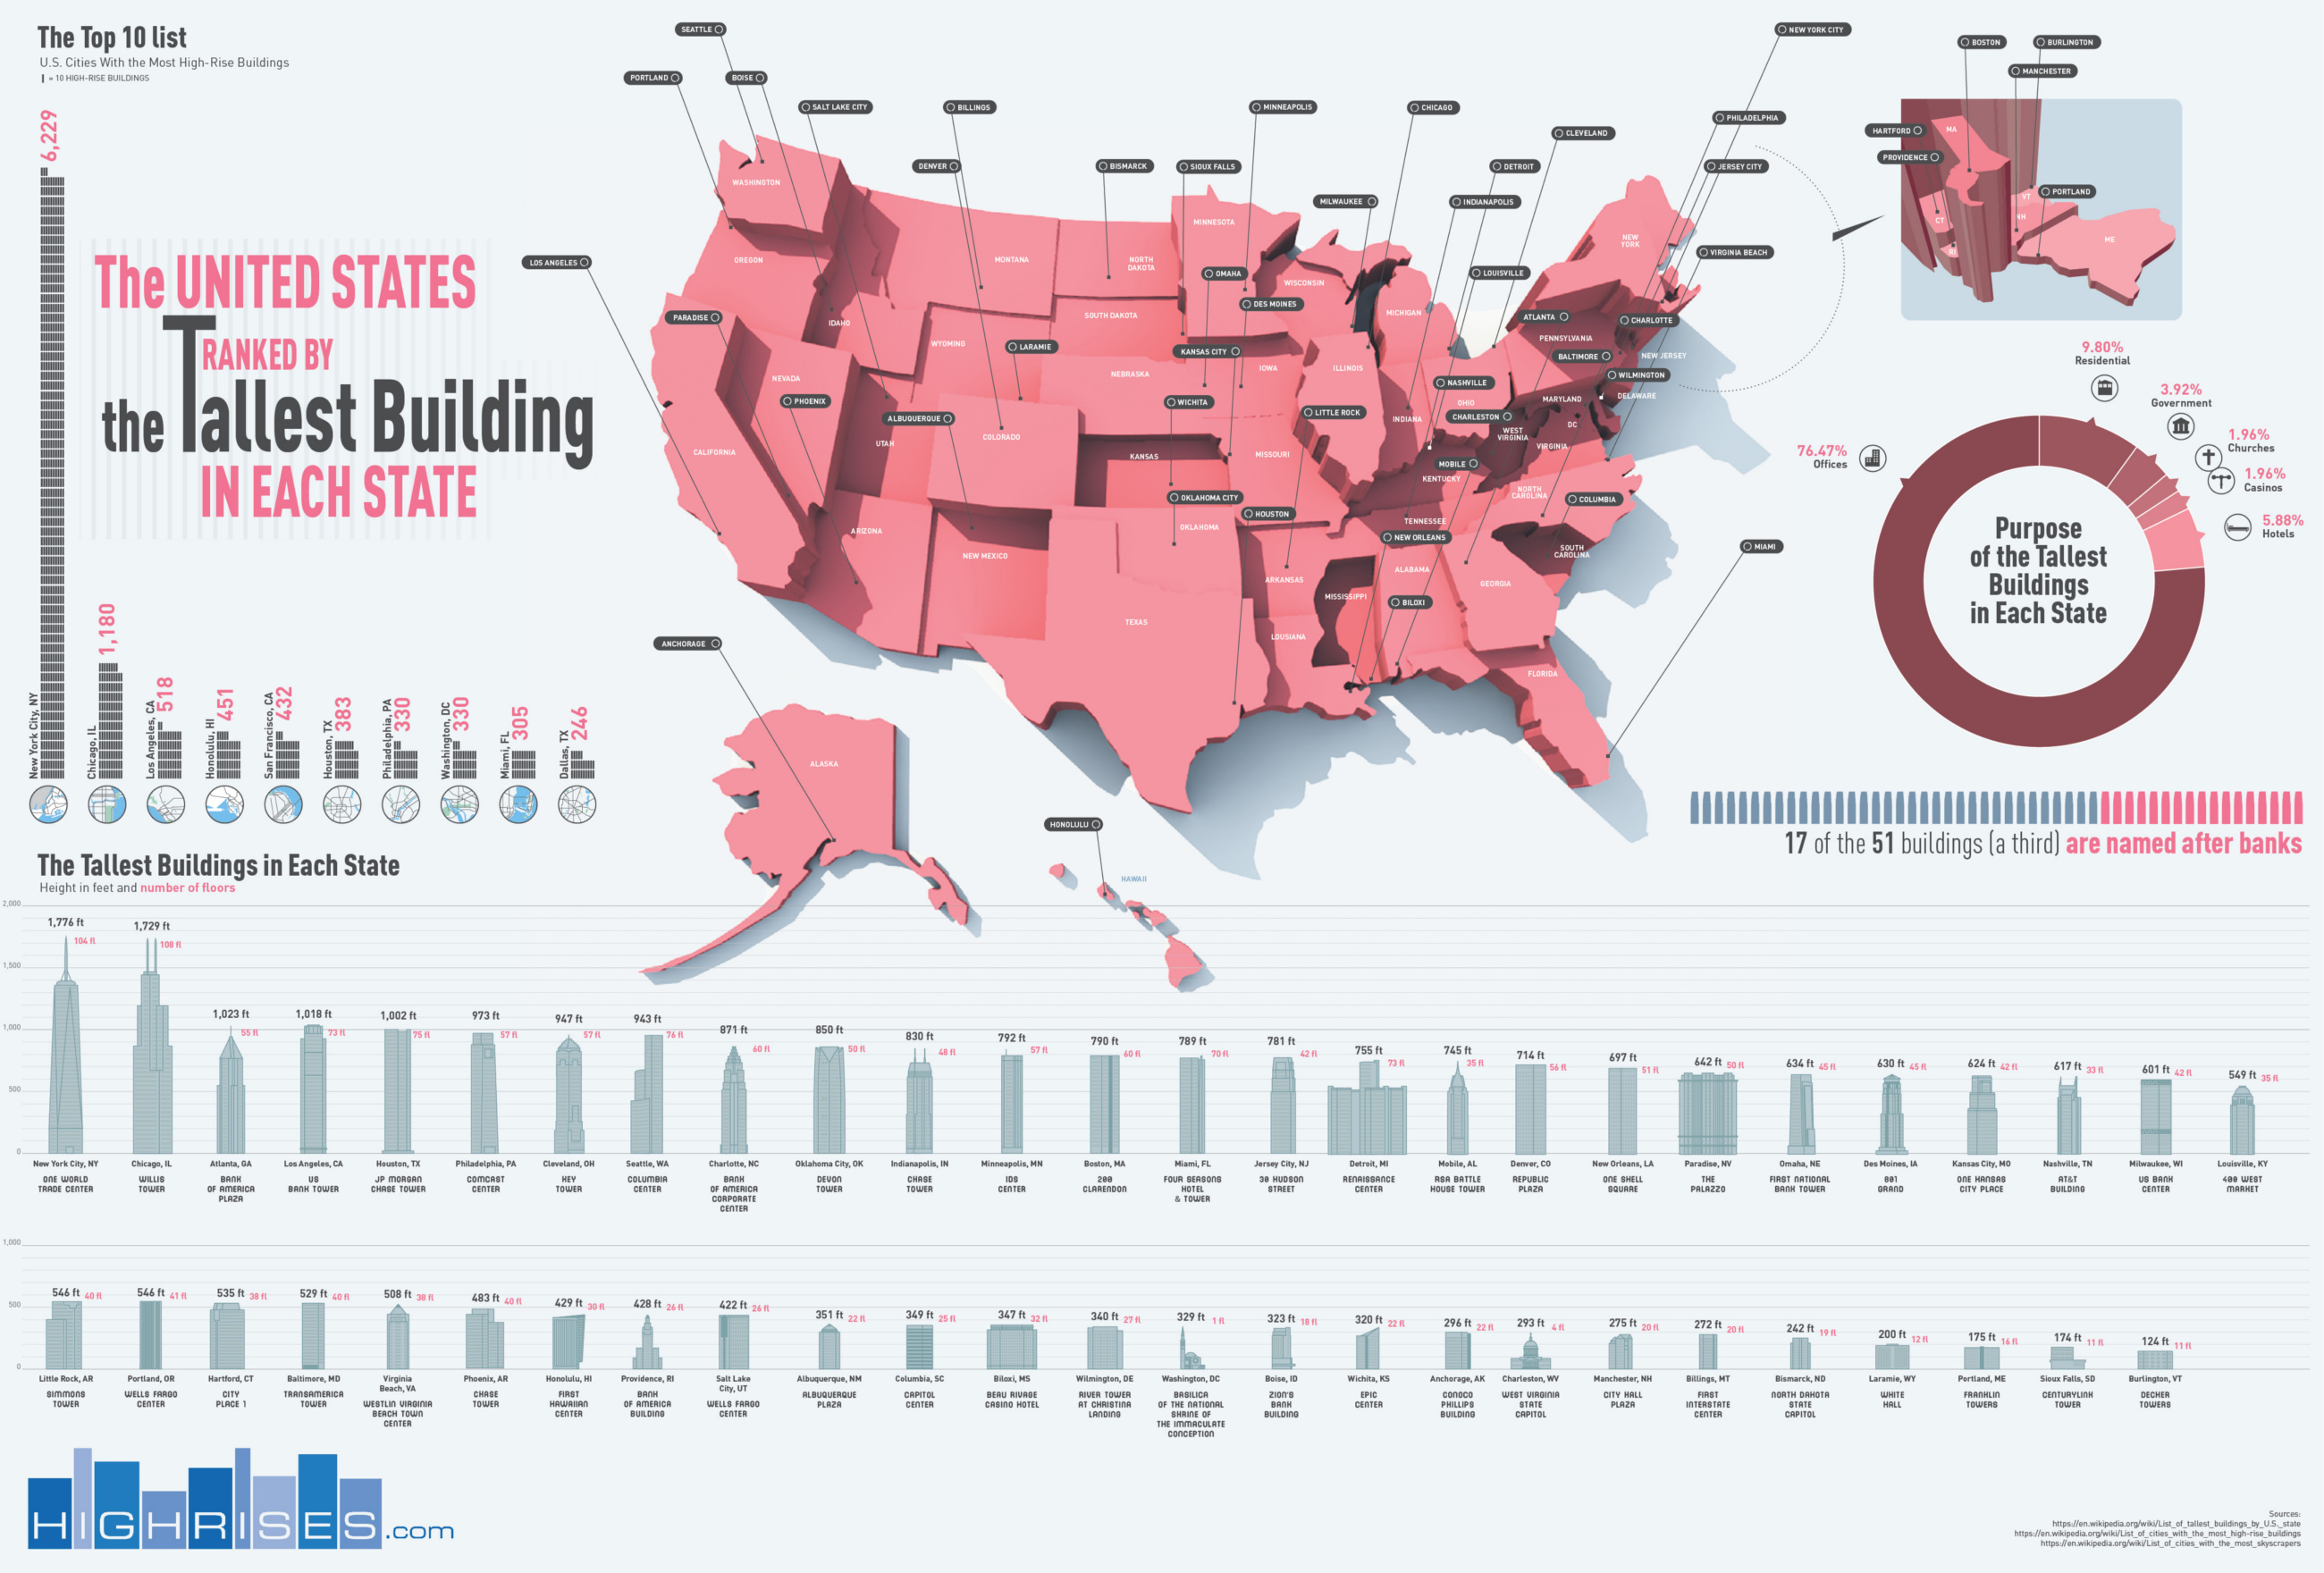 The Tallest Building in Each State